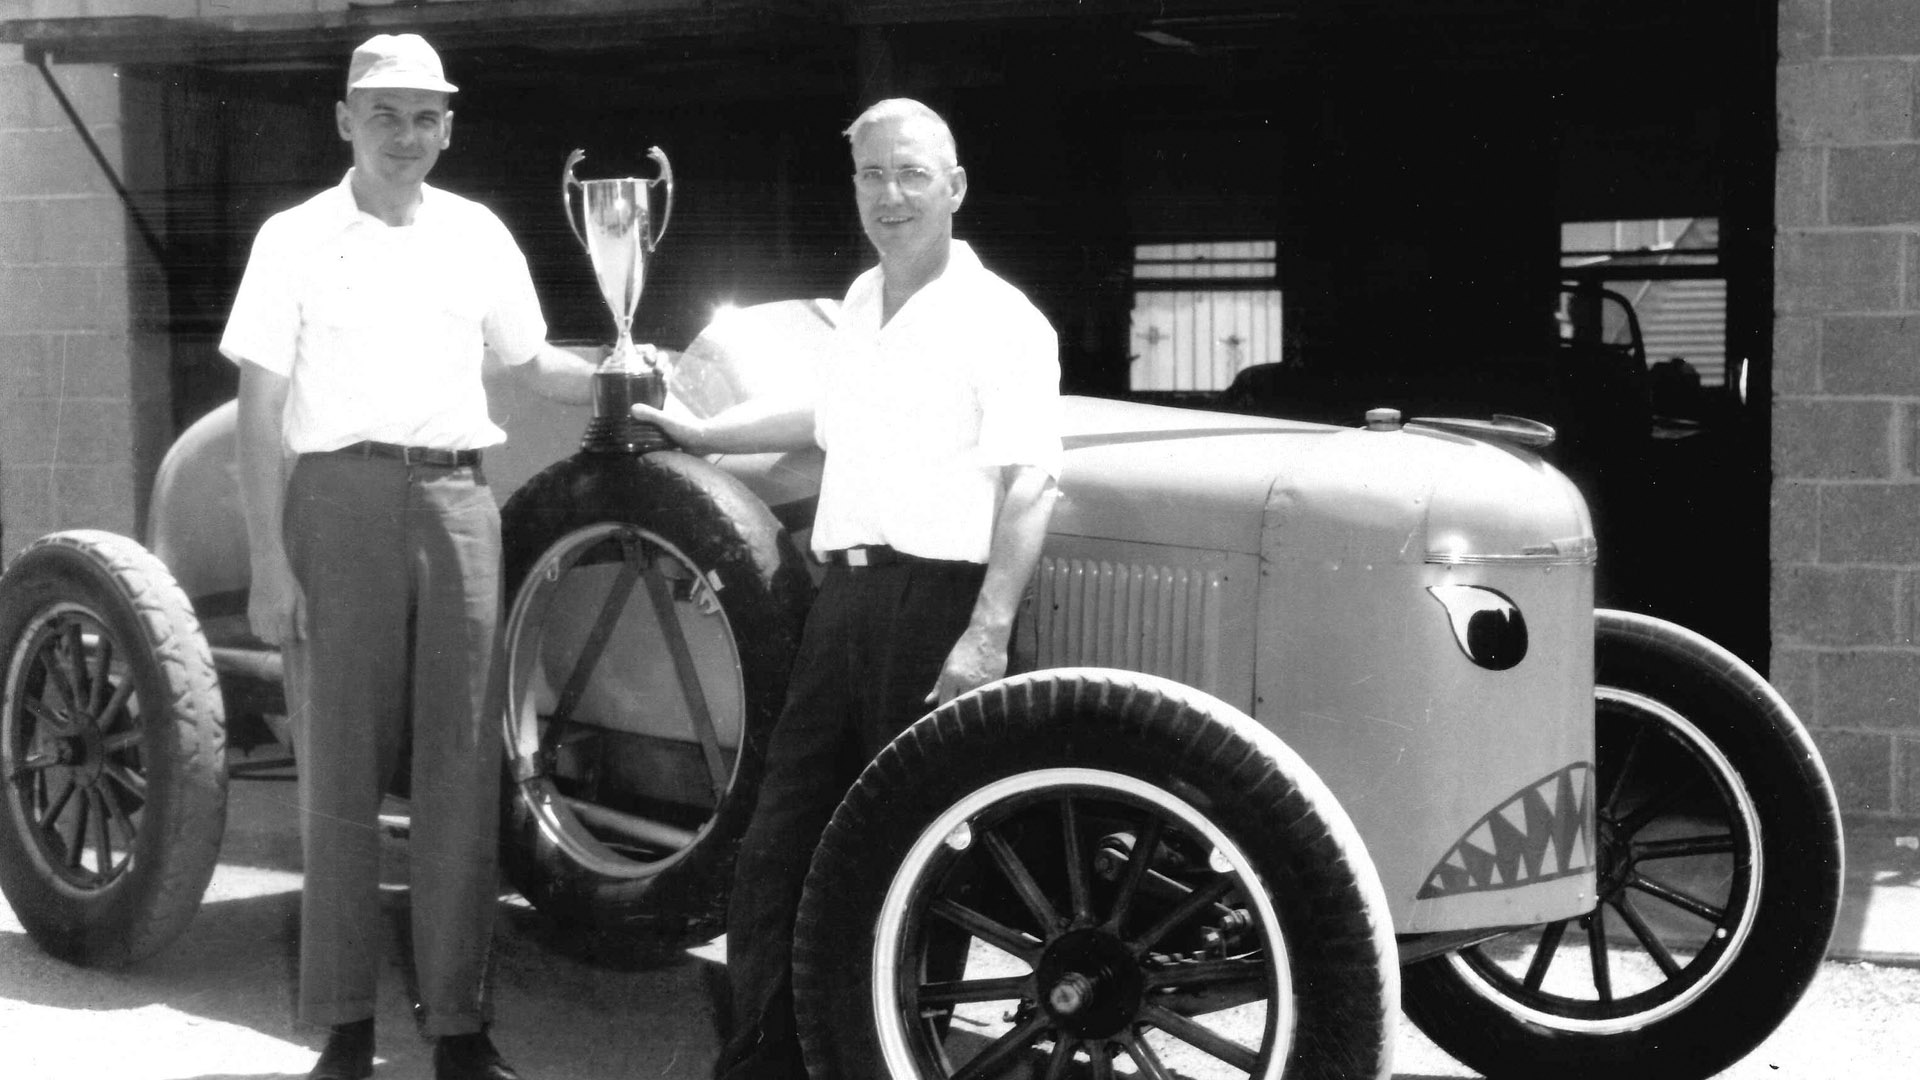 Black and white photo of racing car and two men